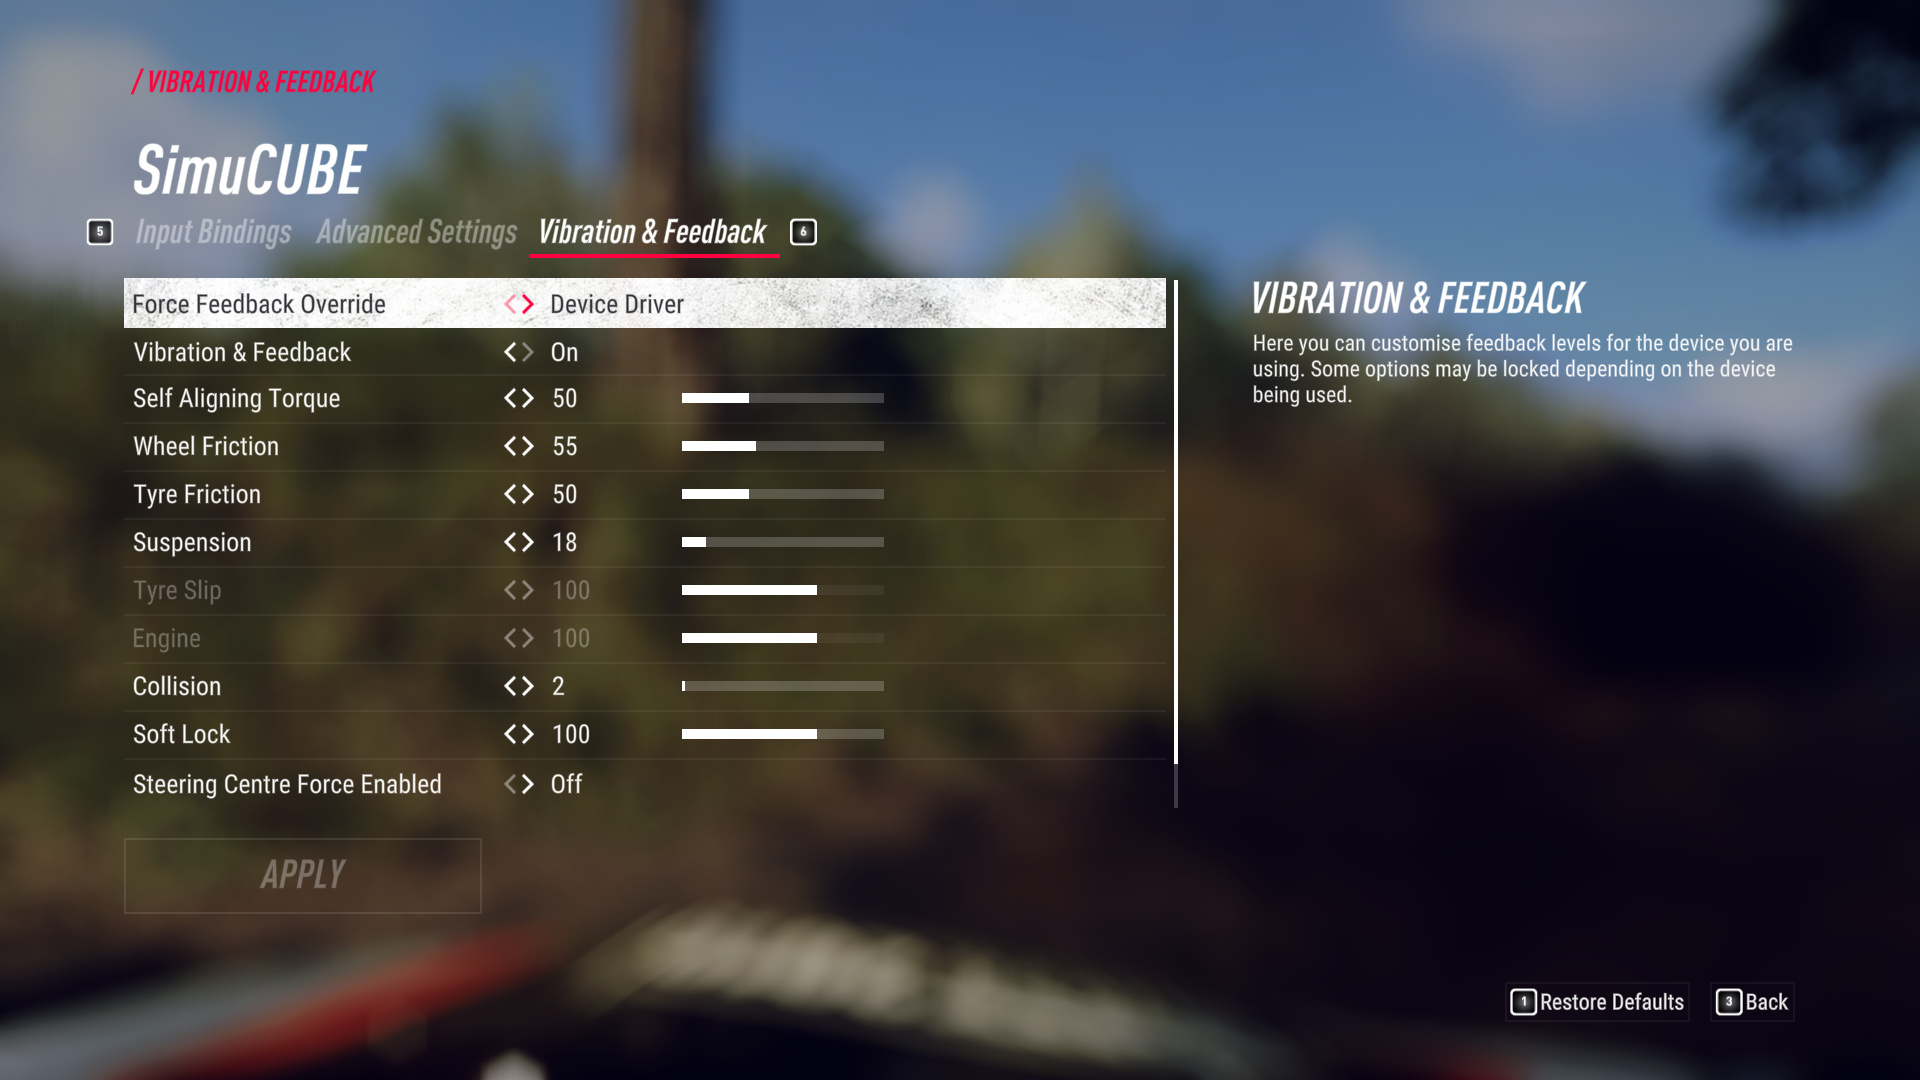 DiRT Rally 2.0 - Full List Of Supported Peripherals - Bsimracing